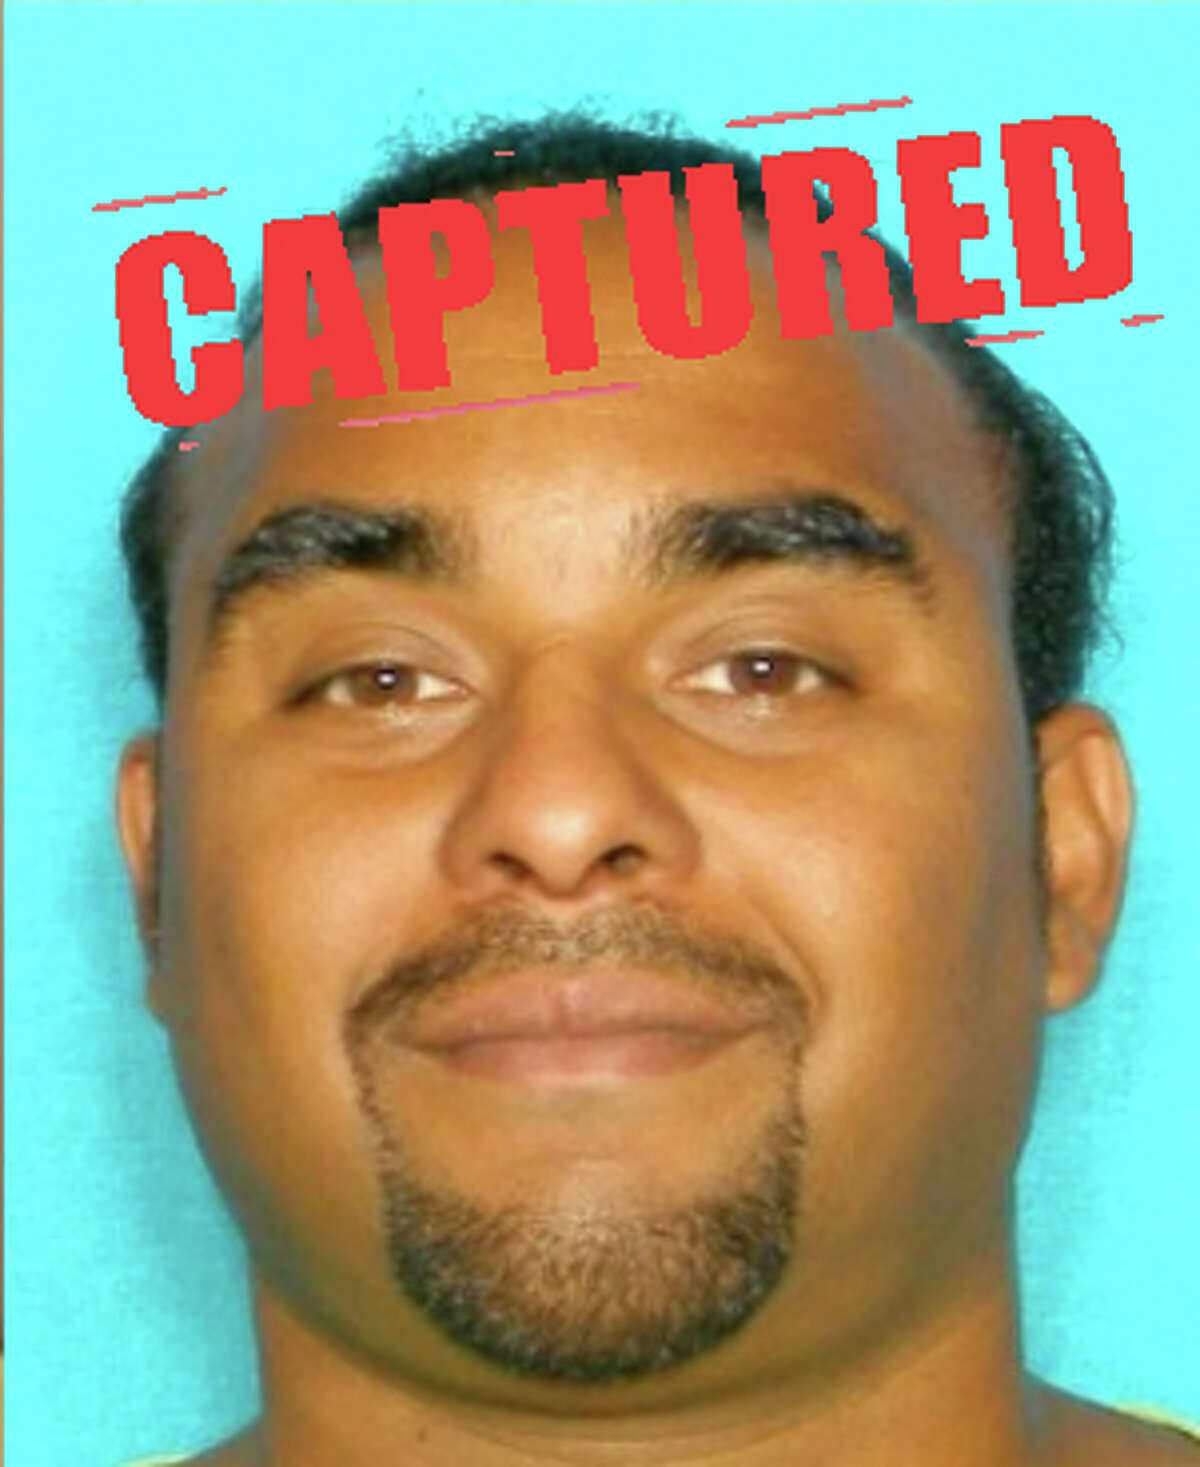 Albert Isaiah Christopher Date captured: Oct. 31, 2016 Capture location: Dallas, TX Wanted for: Failure to comply with sex offender registration requirements, probation violation (original offense: aggravation sexual assault of a child, twocounts)